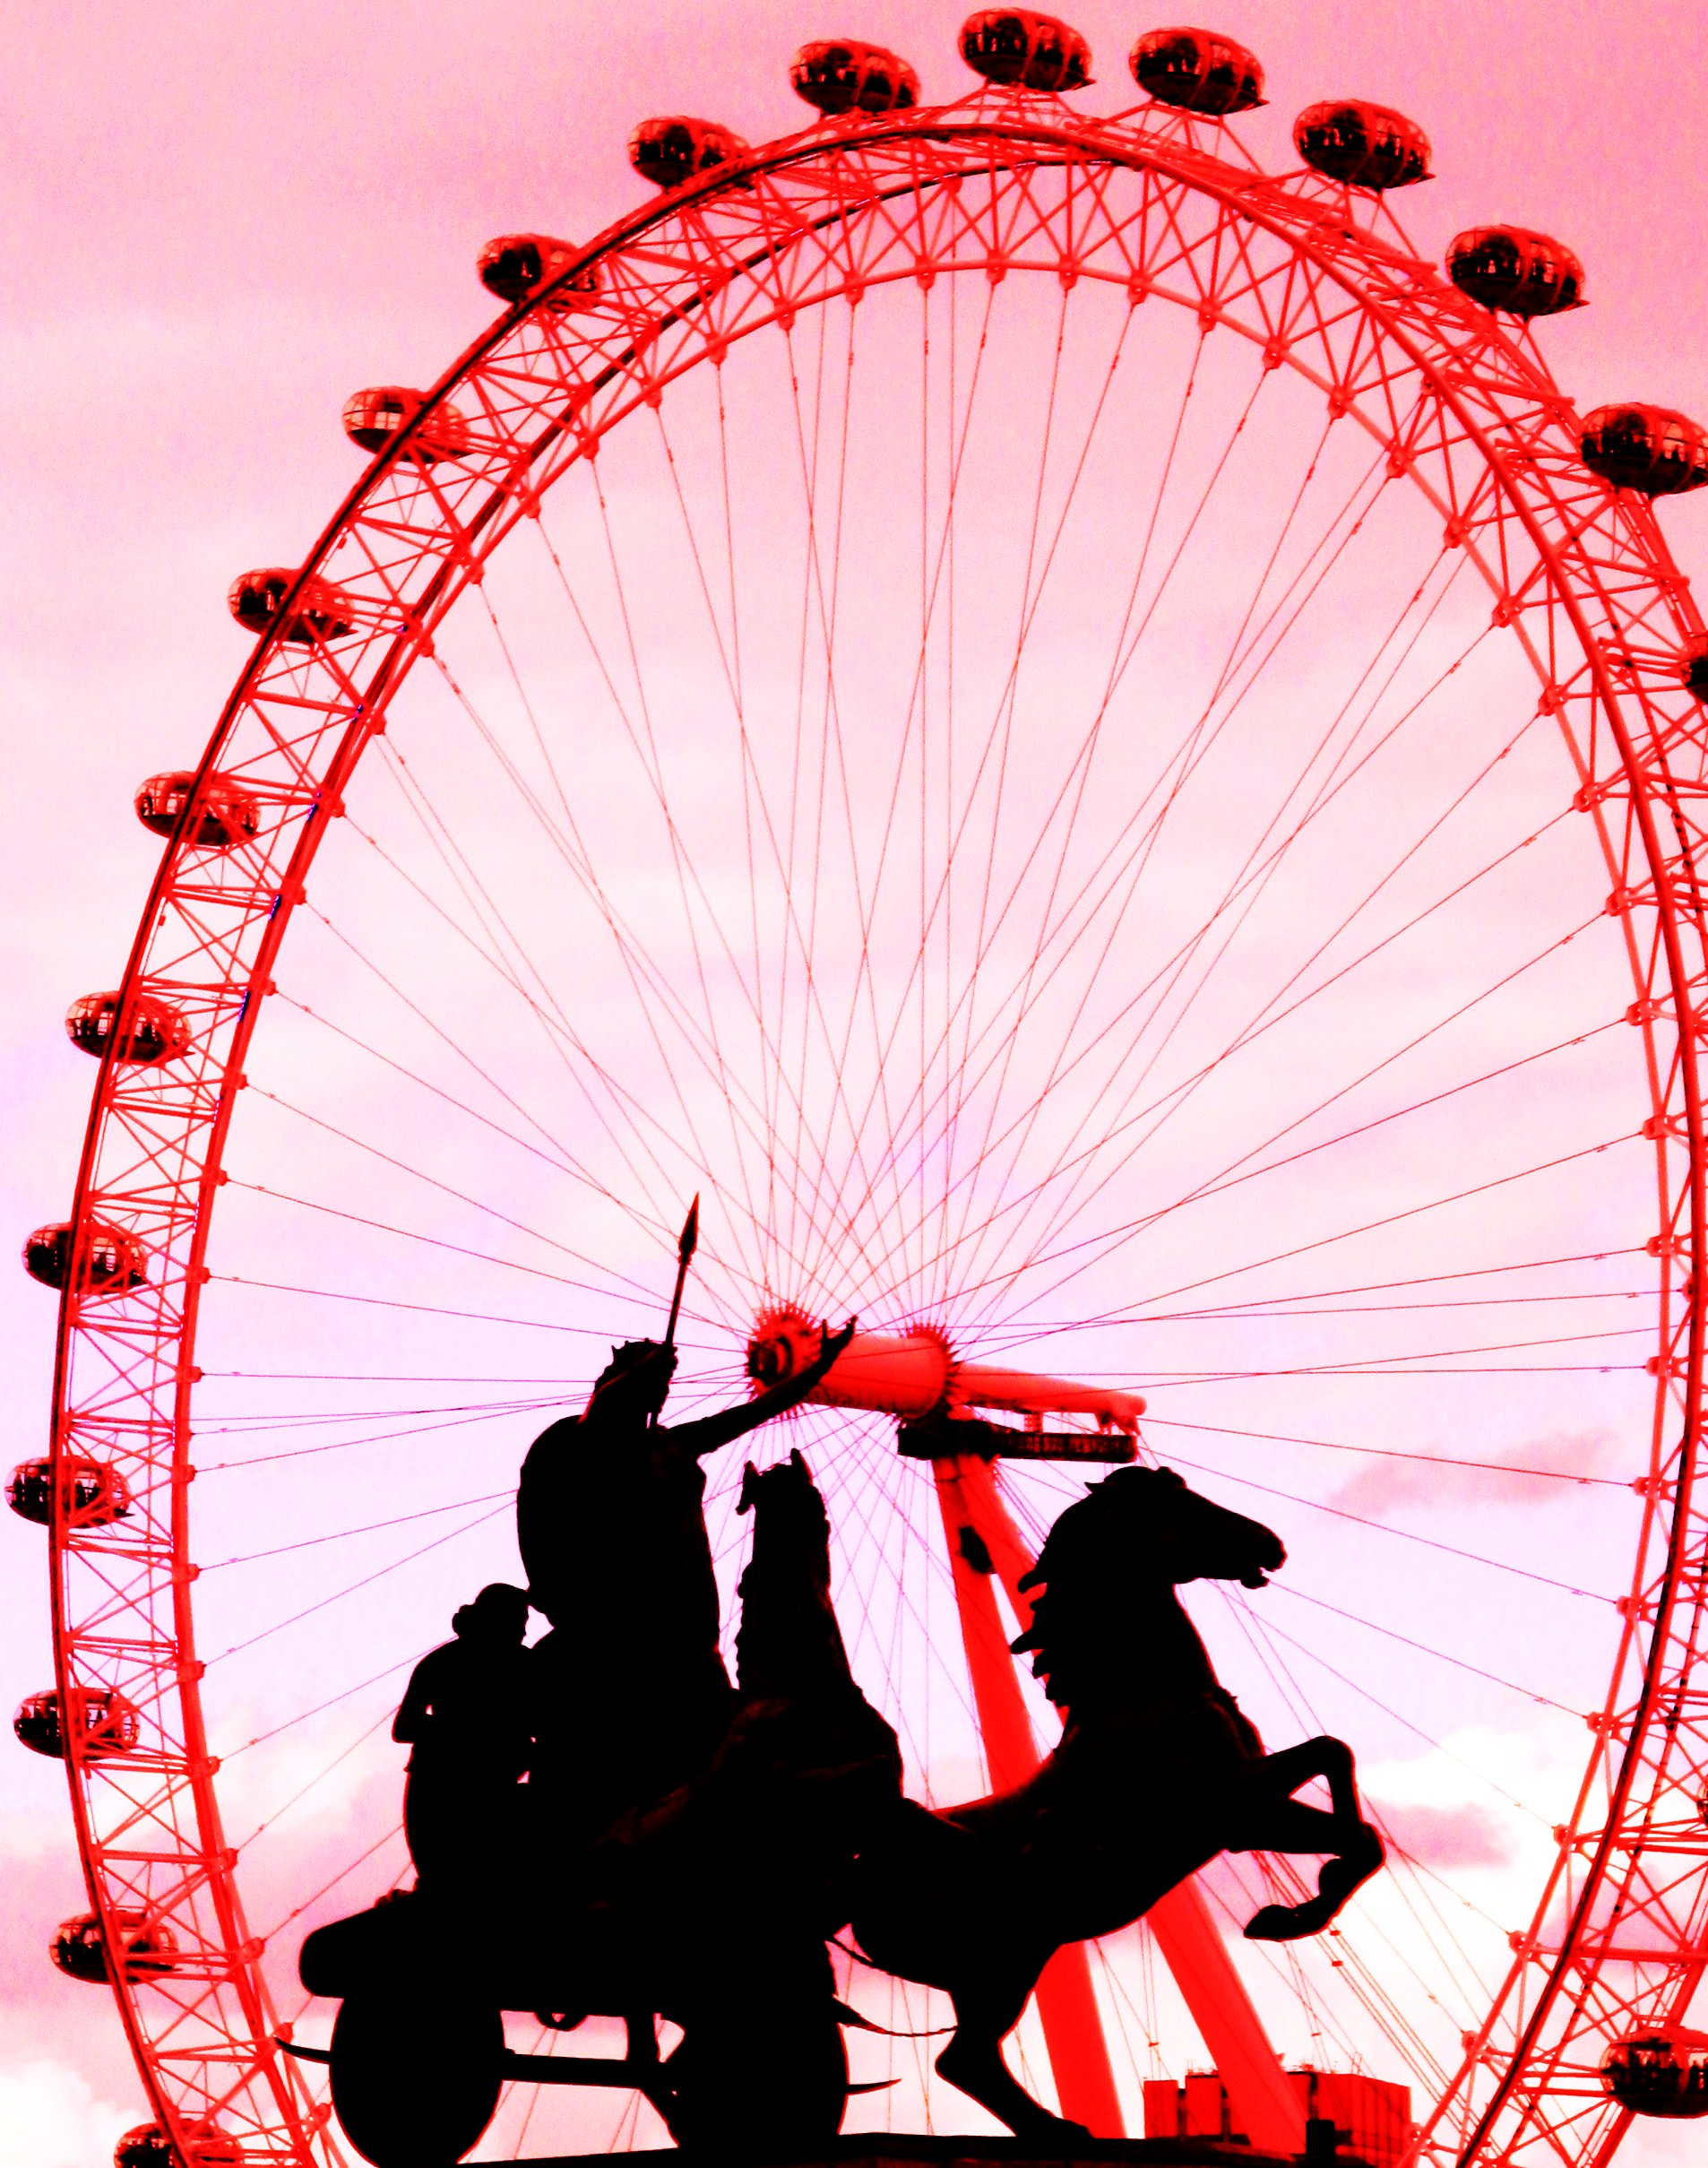 London Eye.jpg - Contemporary Images of London Eye, London Eye Night photo, London Eye Pop Art Image, by PopArtMediaProductions